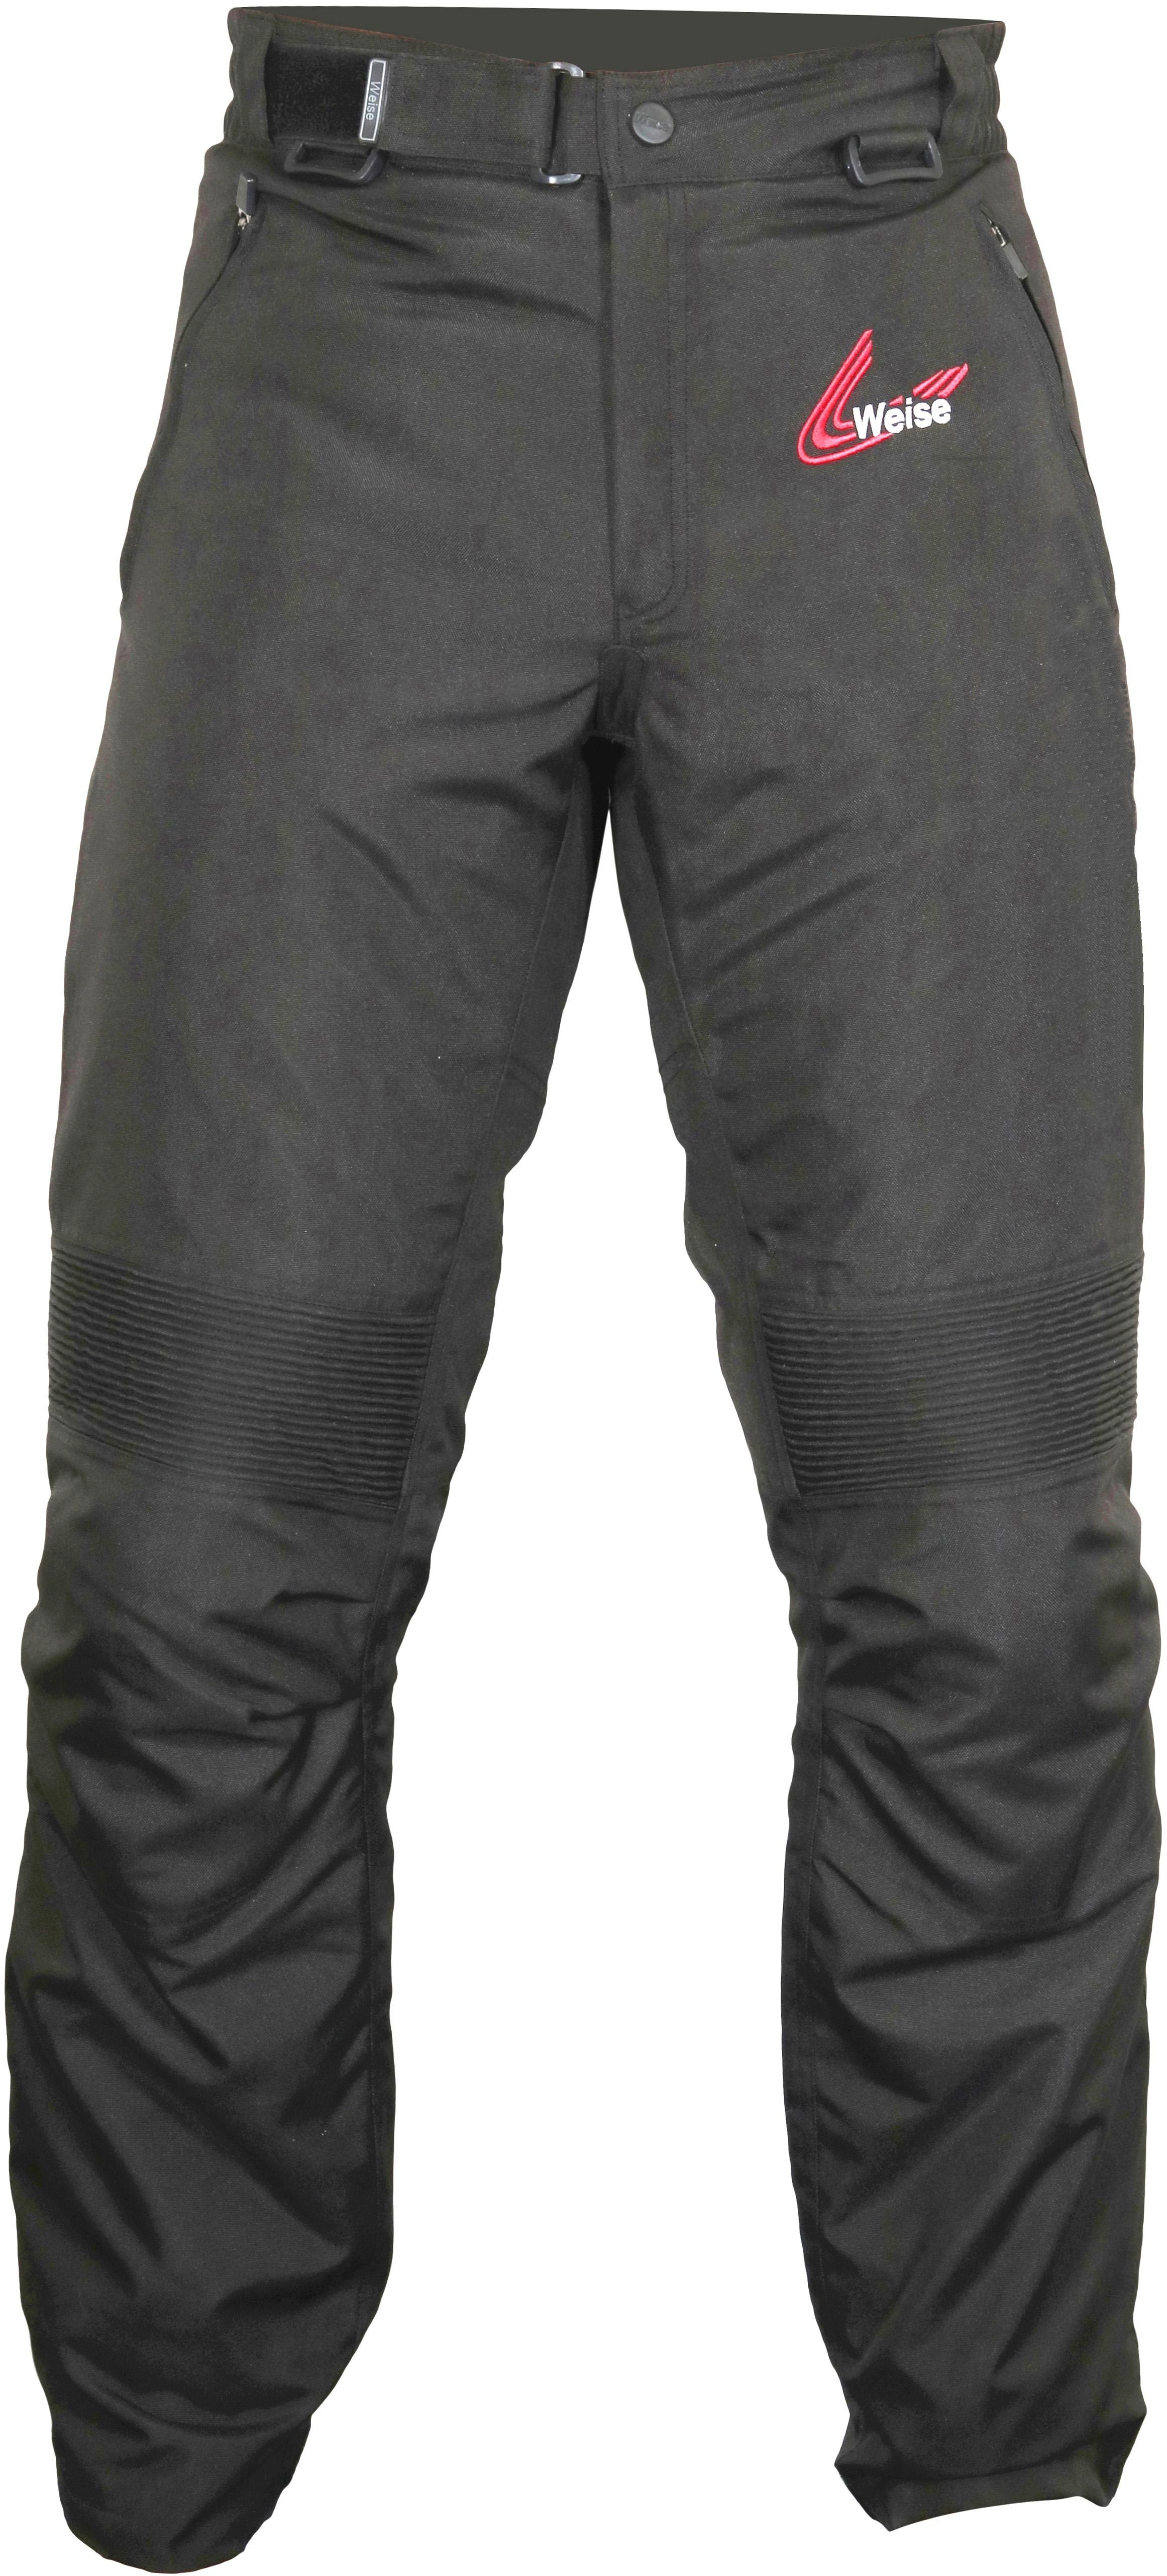 Weise Core Plus Motorcycle Jeans - Black, Xl